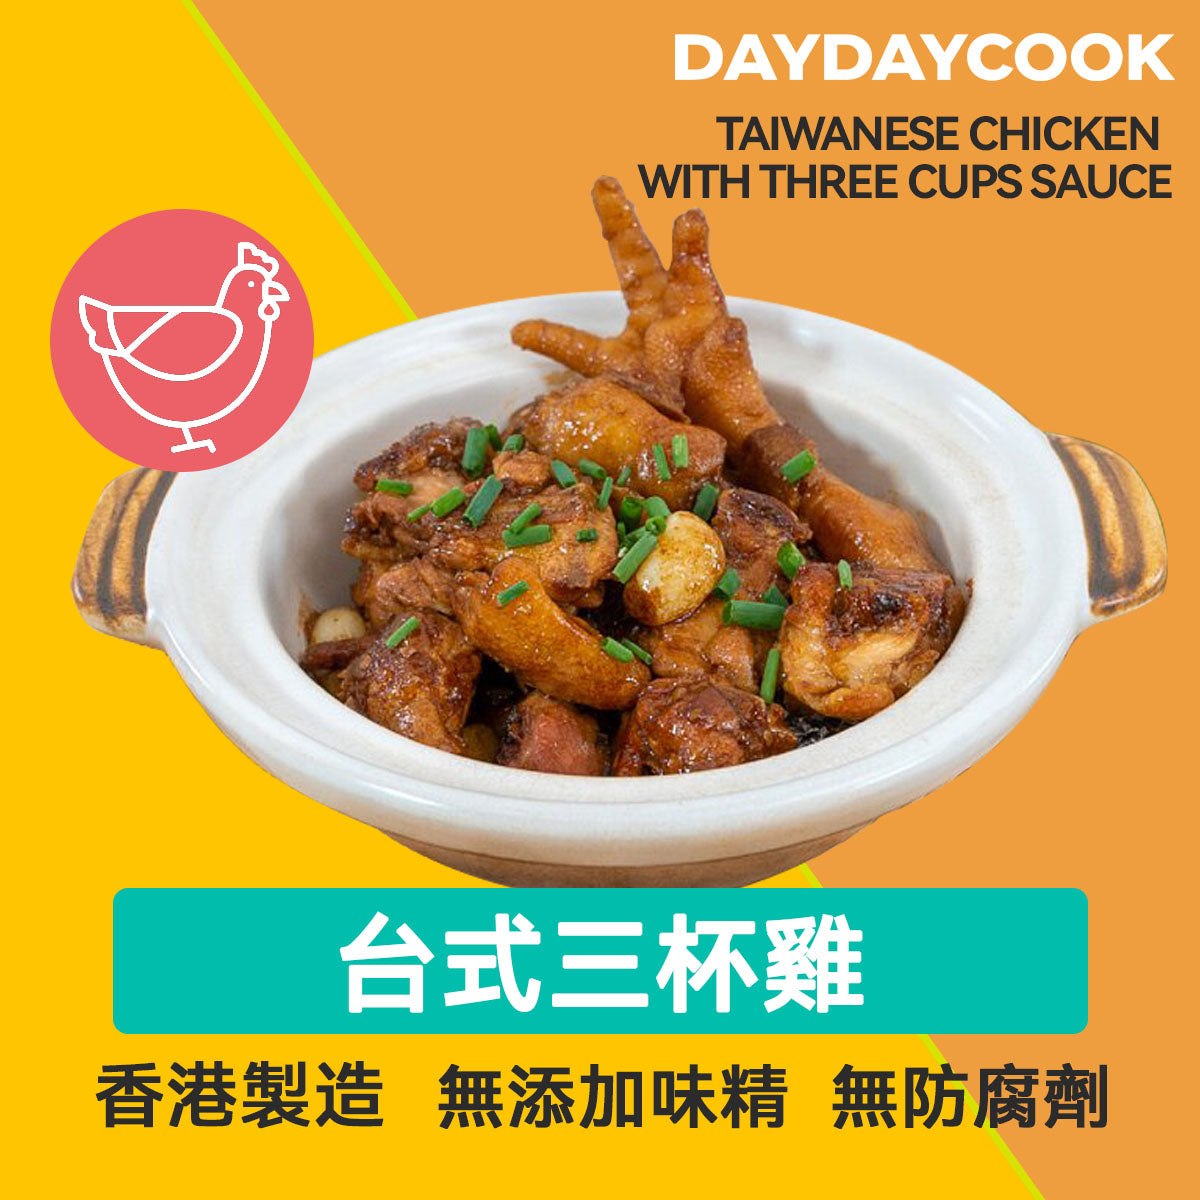 Taiwanese Chicken with Three Cups Sauce